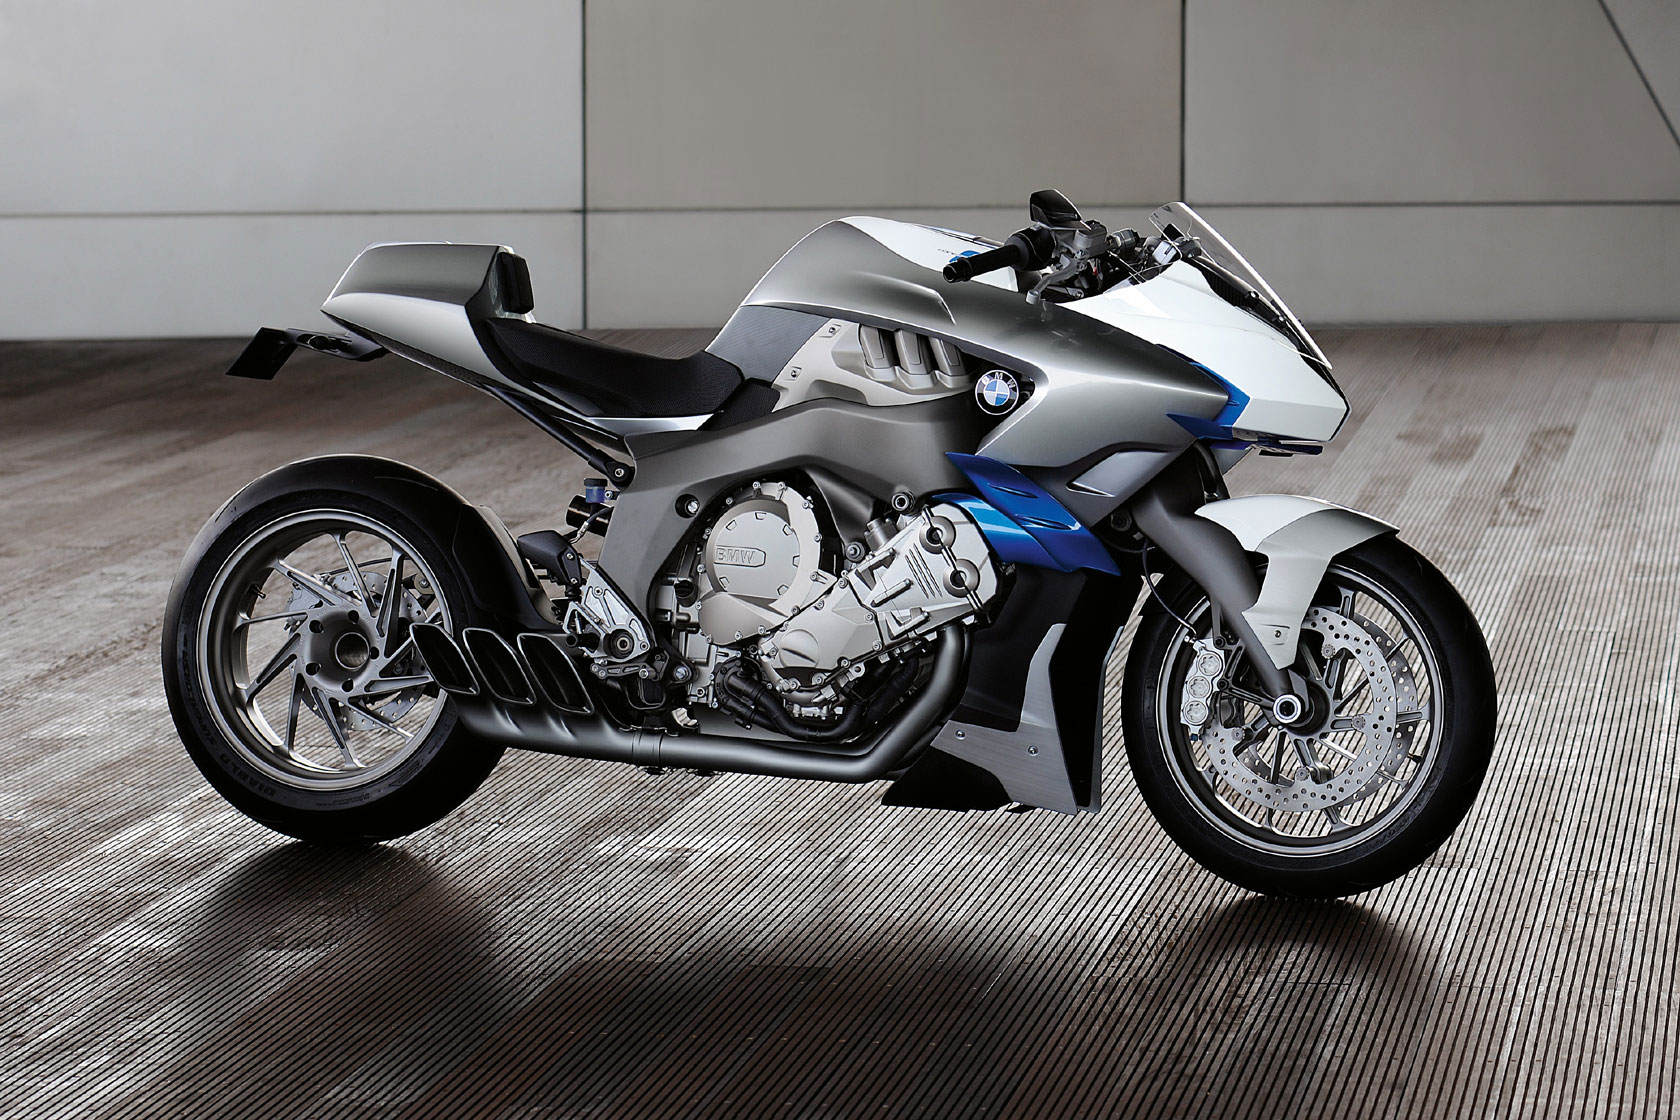 BMW Prototype and Concept Motorcycles